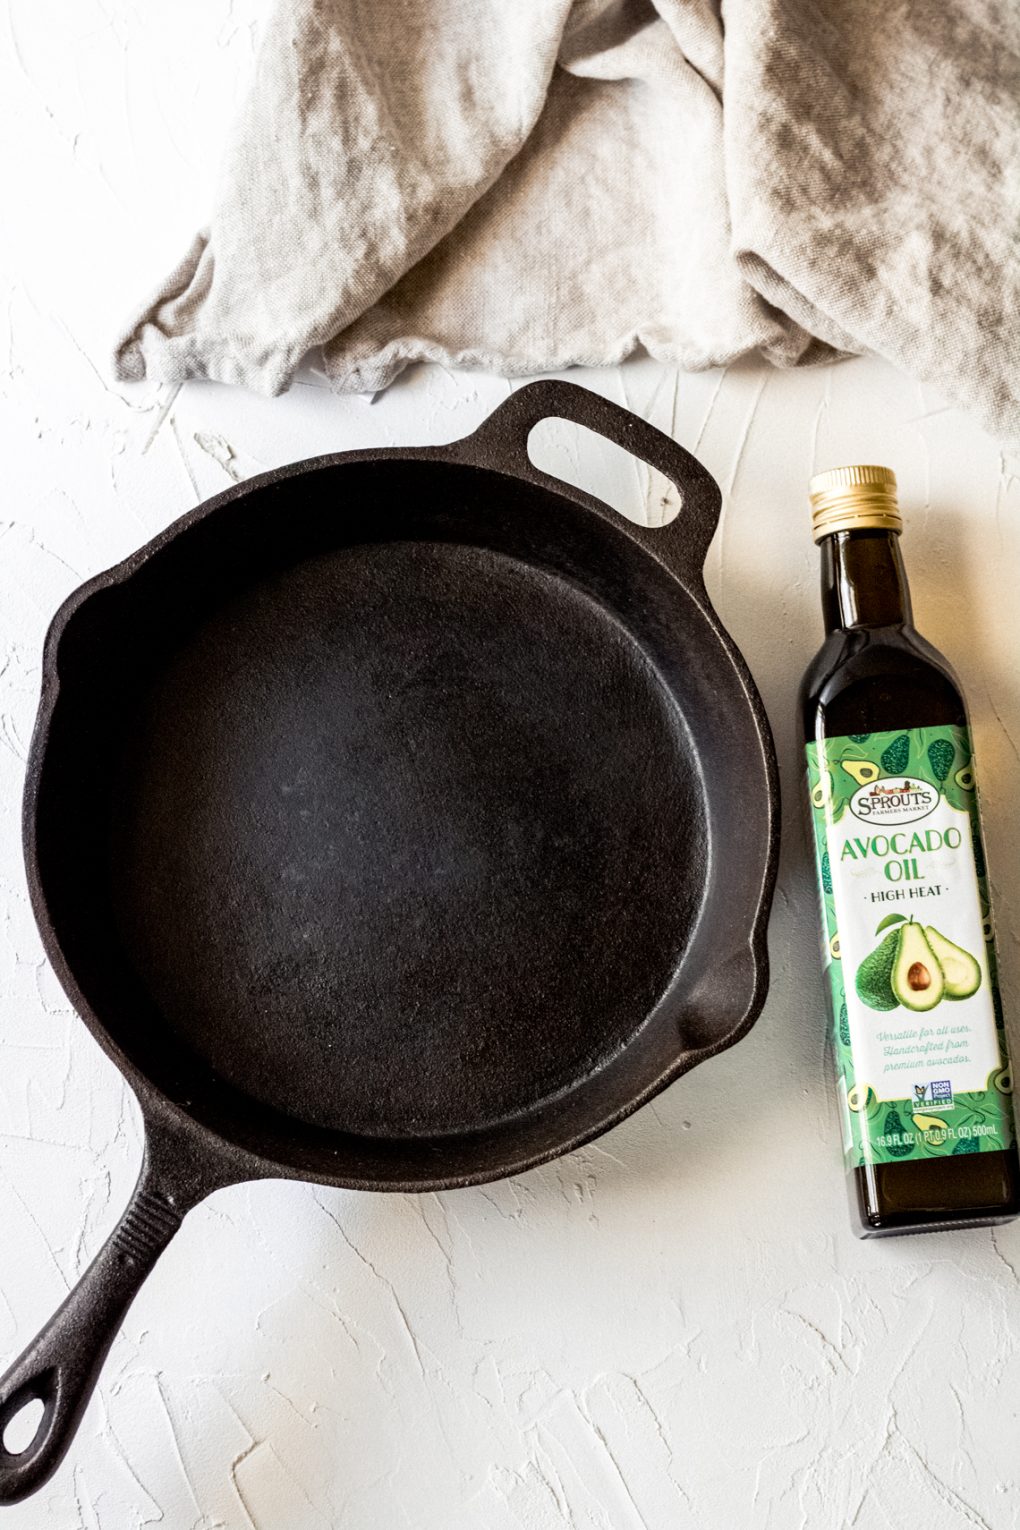 a cast iron skillet and bottle of avocado oil